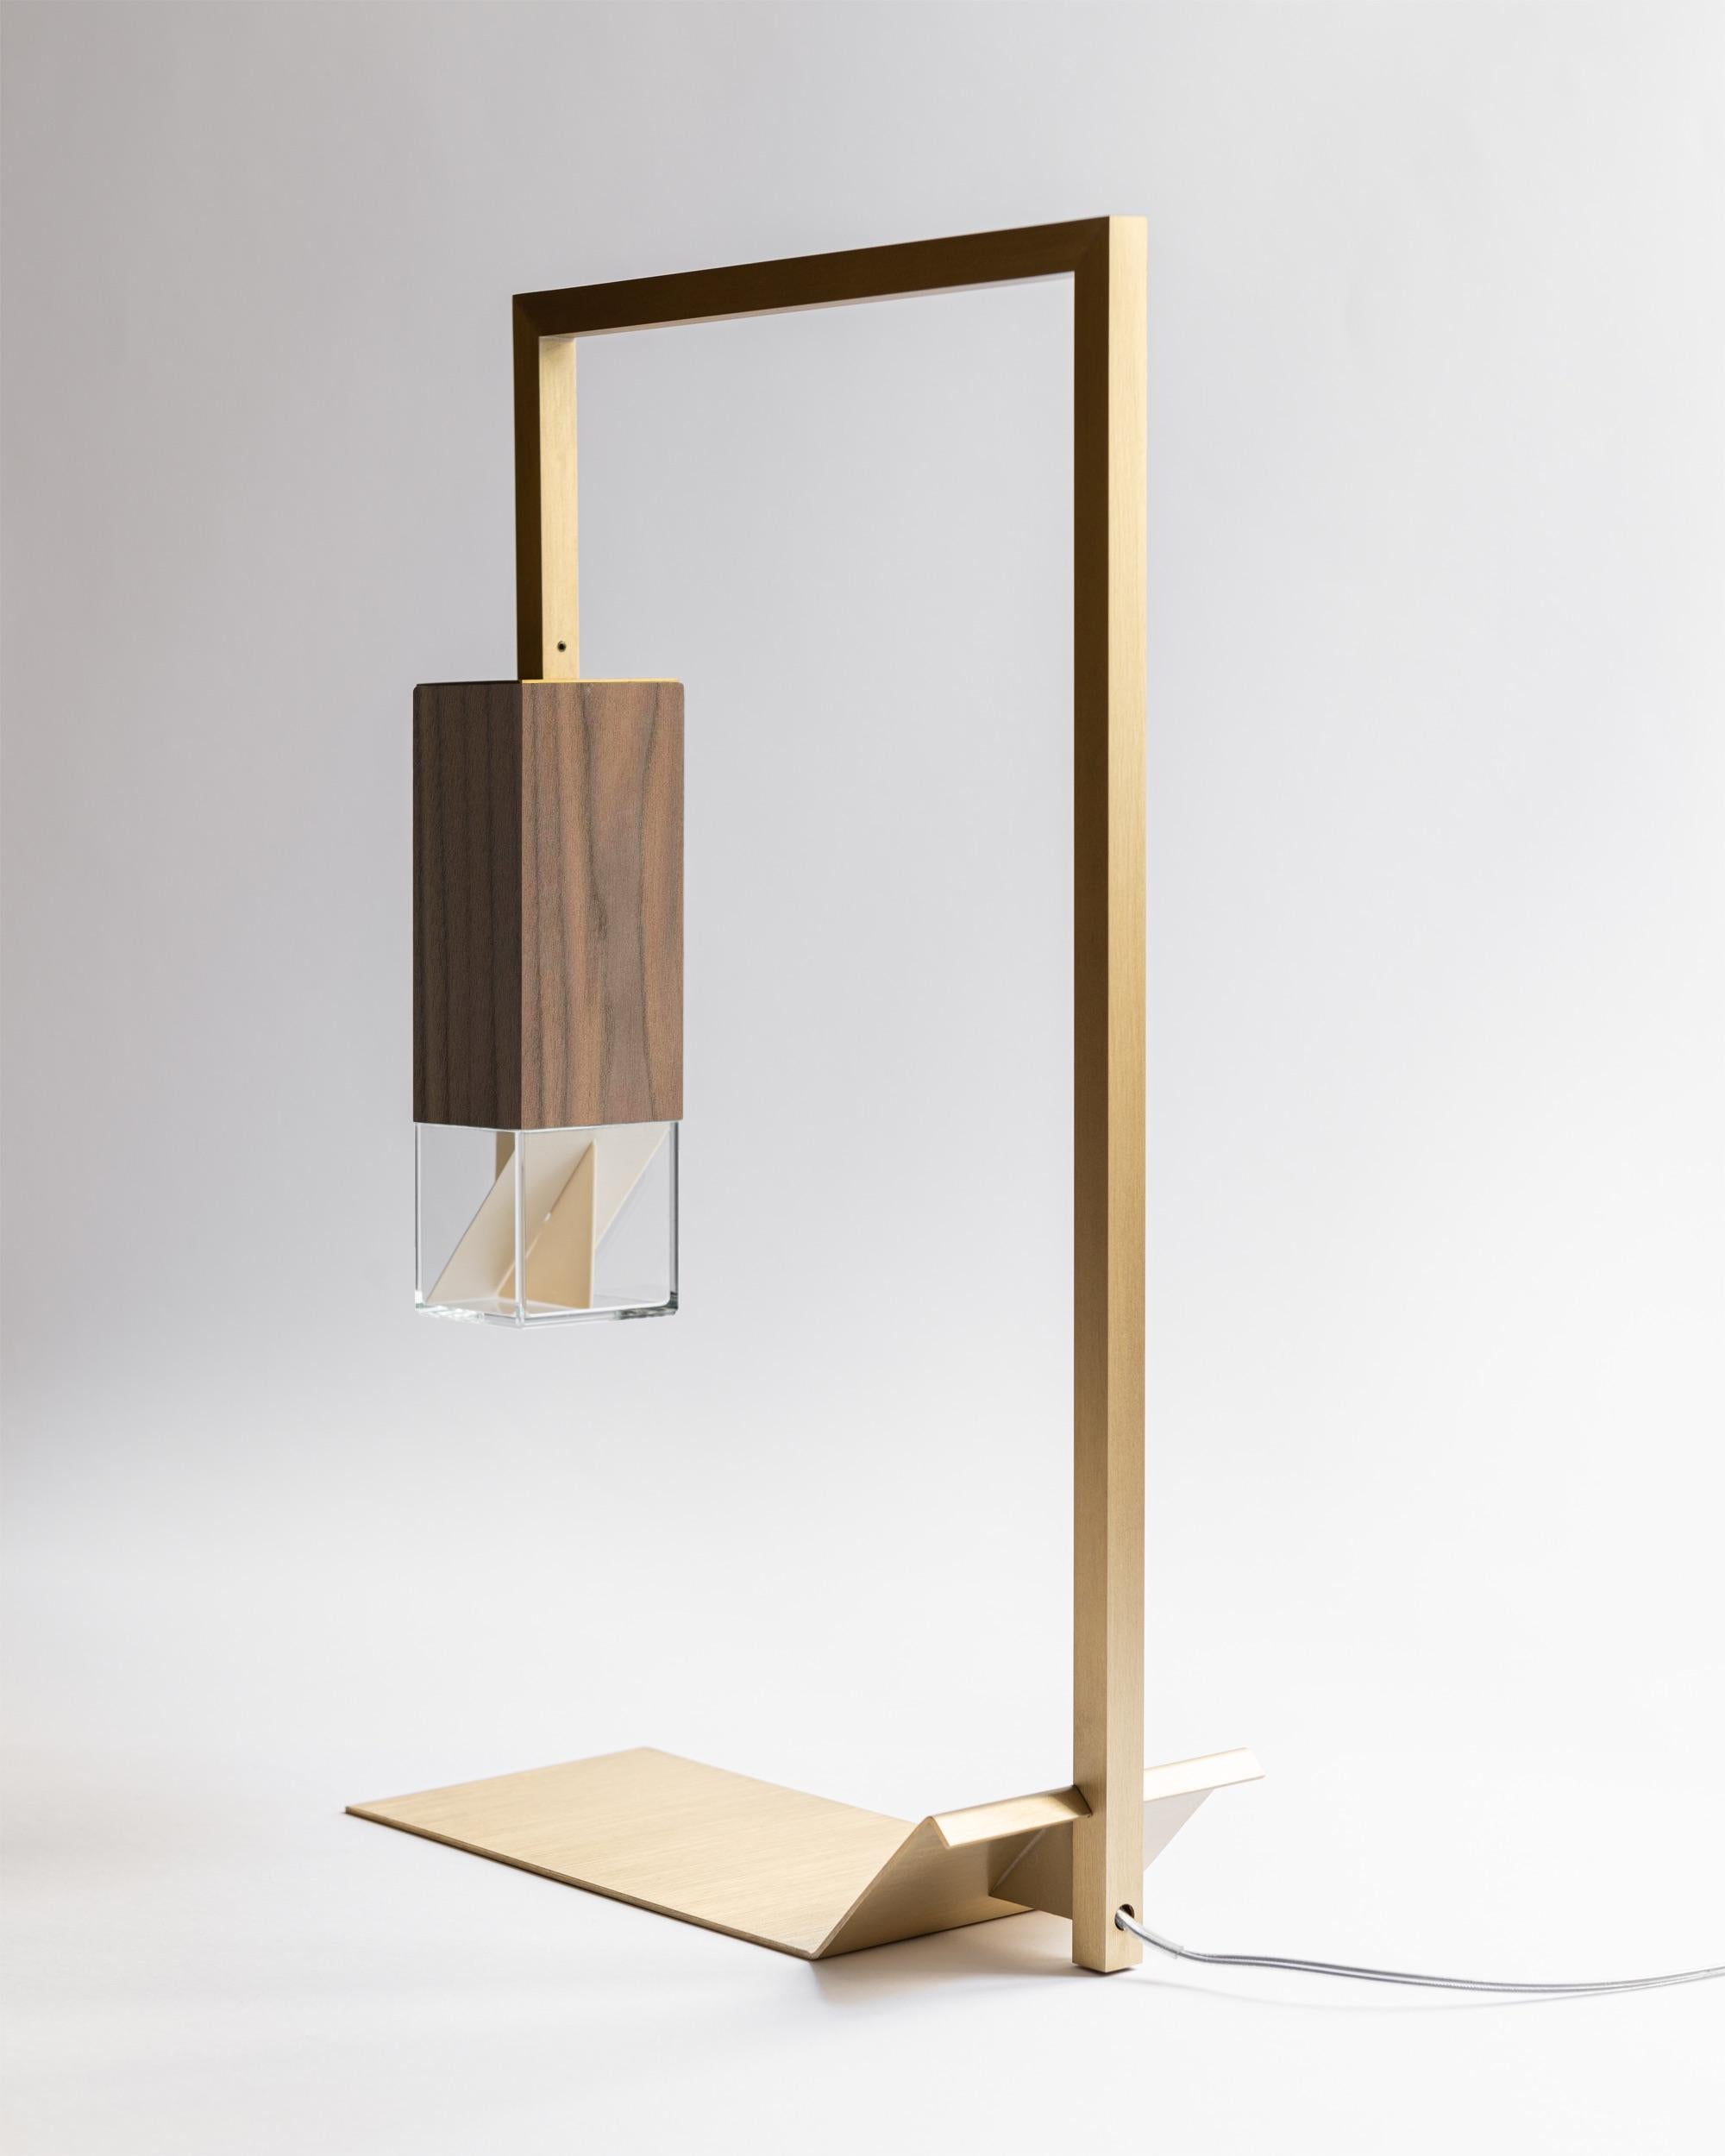 About
Modern Minimalist Handmade Walnut Wood Table Lamp by Formaminima

Lamp/Two Wood
Design by Formaminima
Table Light
Materials:
Body lamp handcrafted in solid Canaletto walnut natural oil finish / crystal glass diffuser hosting Limoges